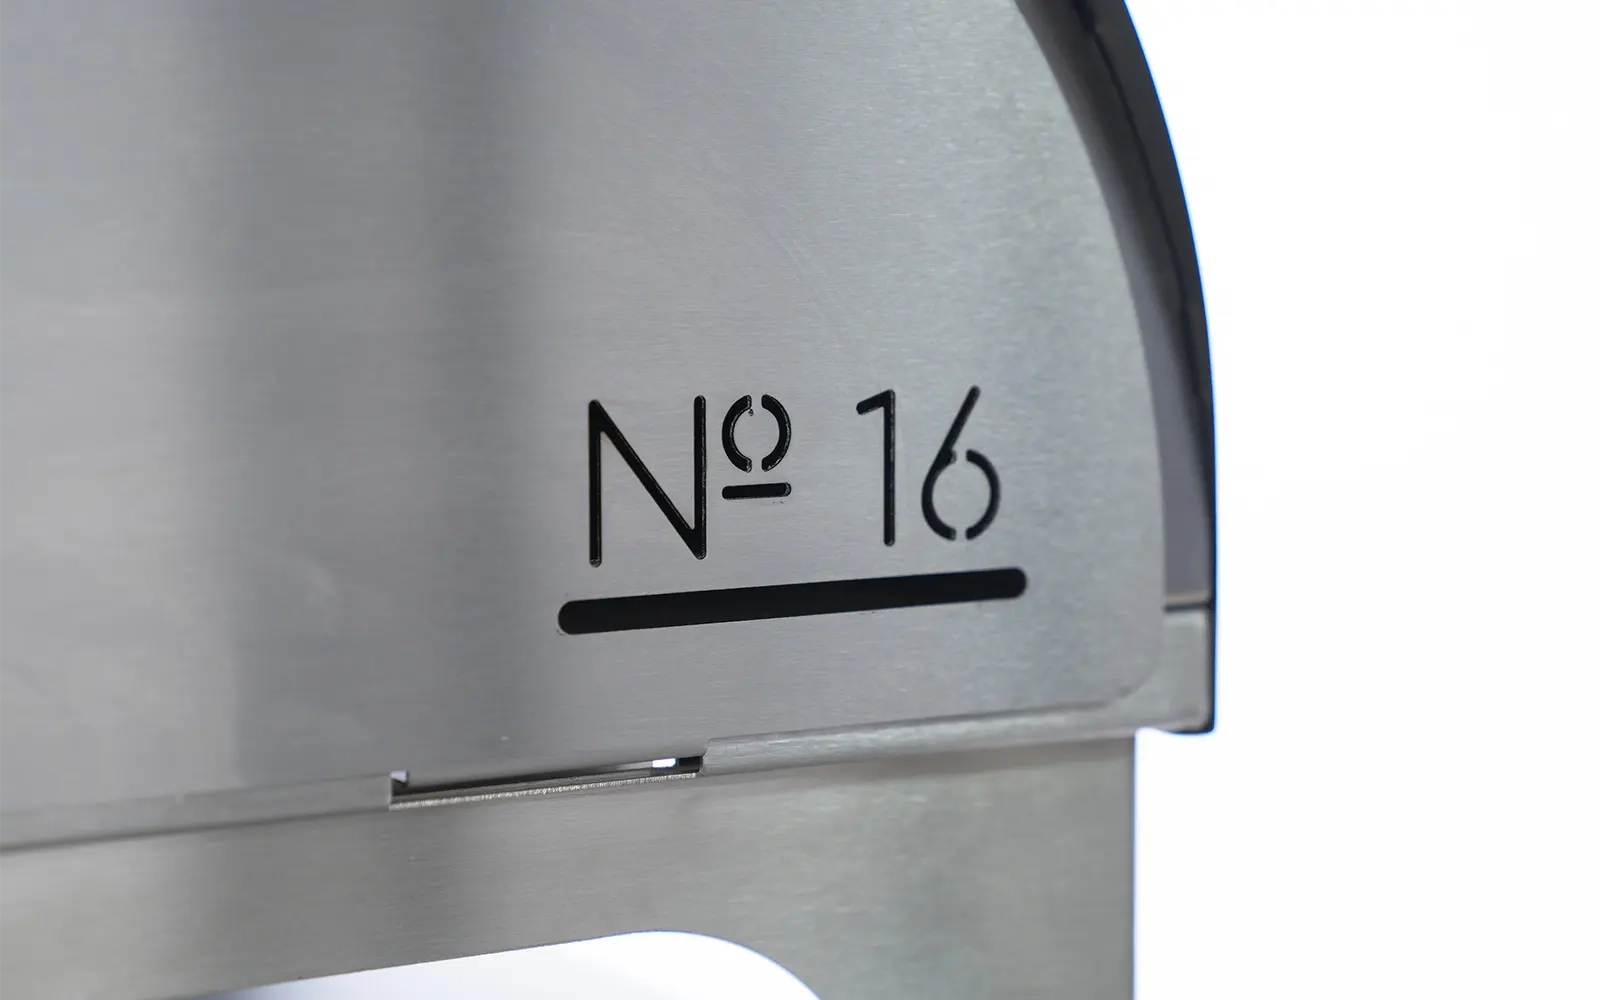 Close-up of model name of The No.16 pizza oven